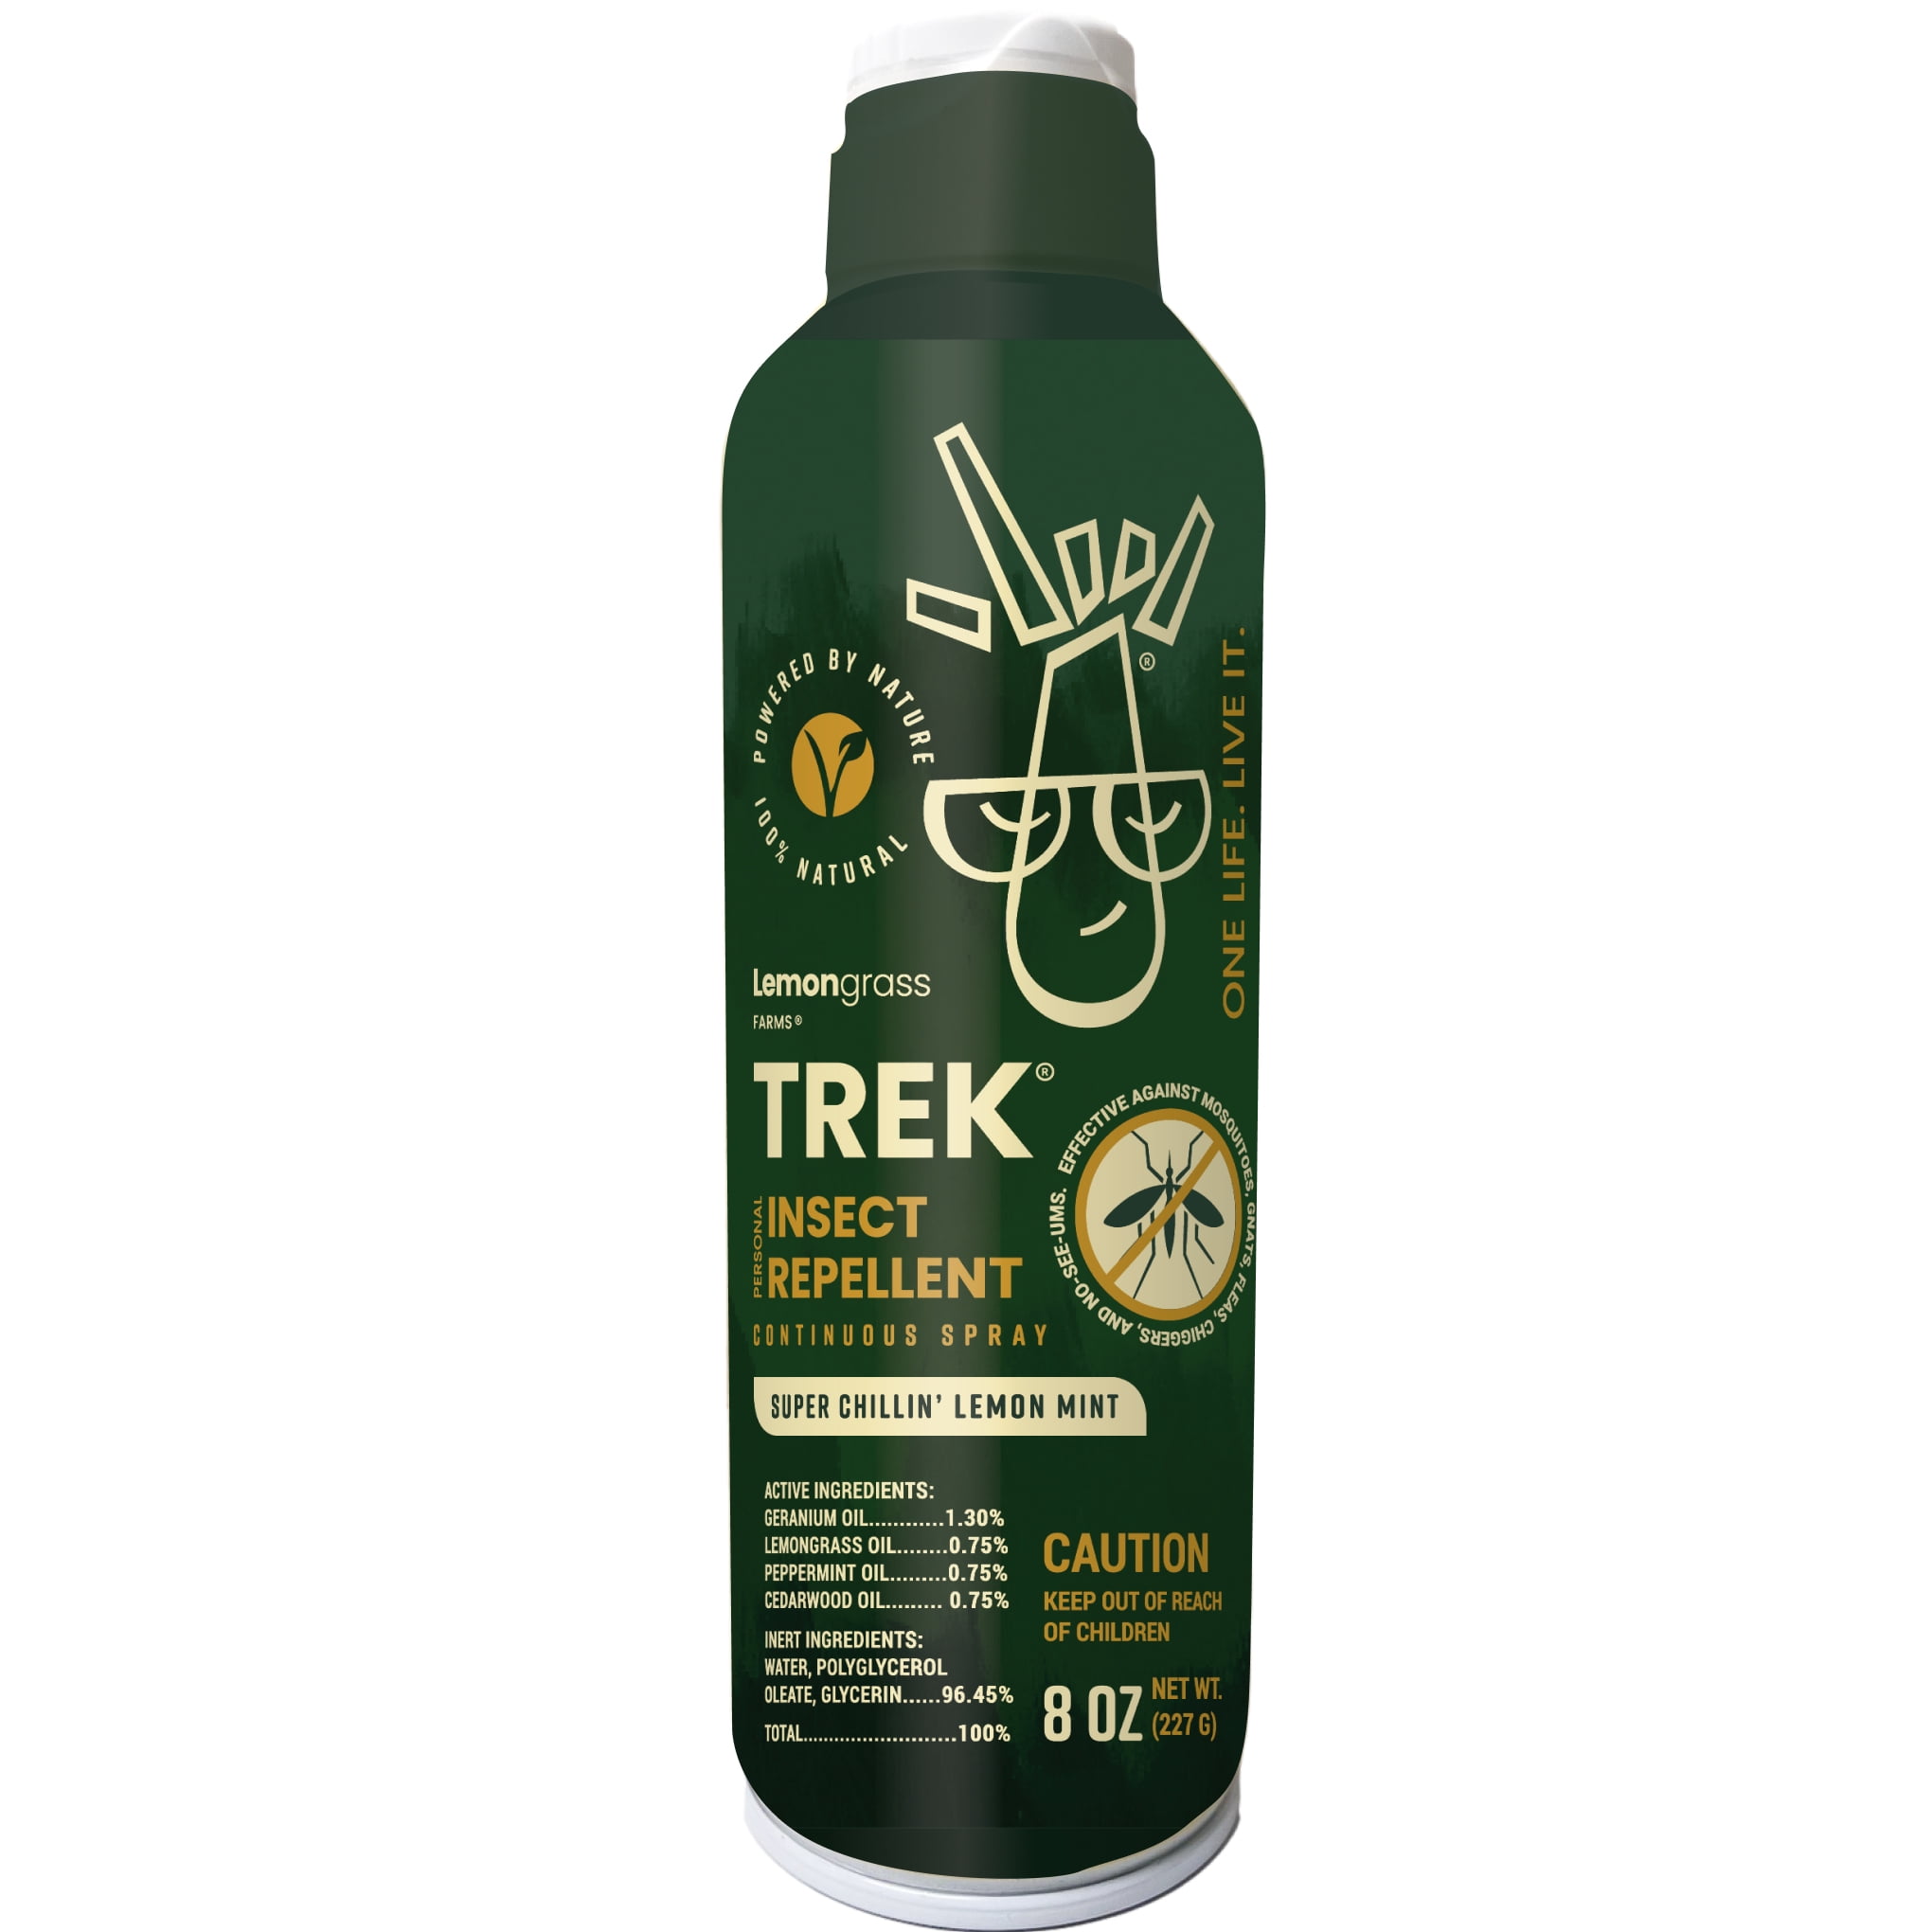 Lemongrass Farms Trek All Natural Insect Repellent, Continuous Spray, 8 oz